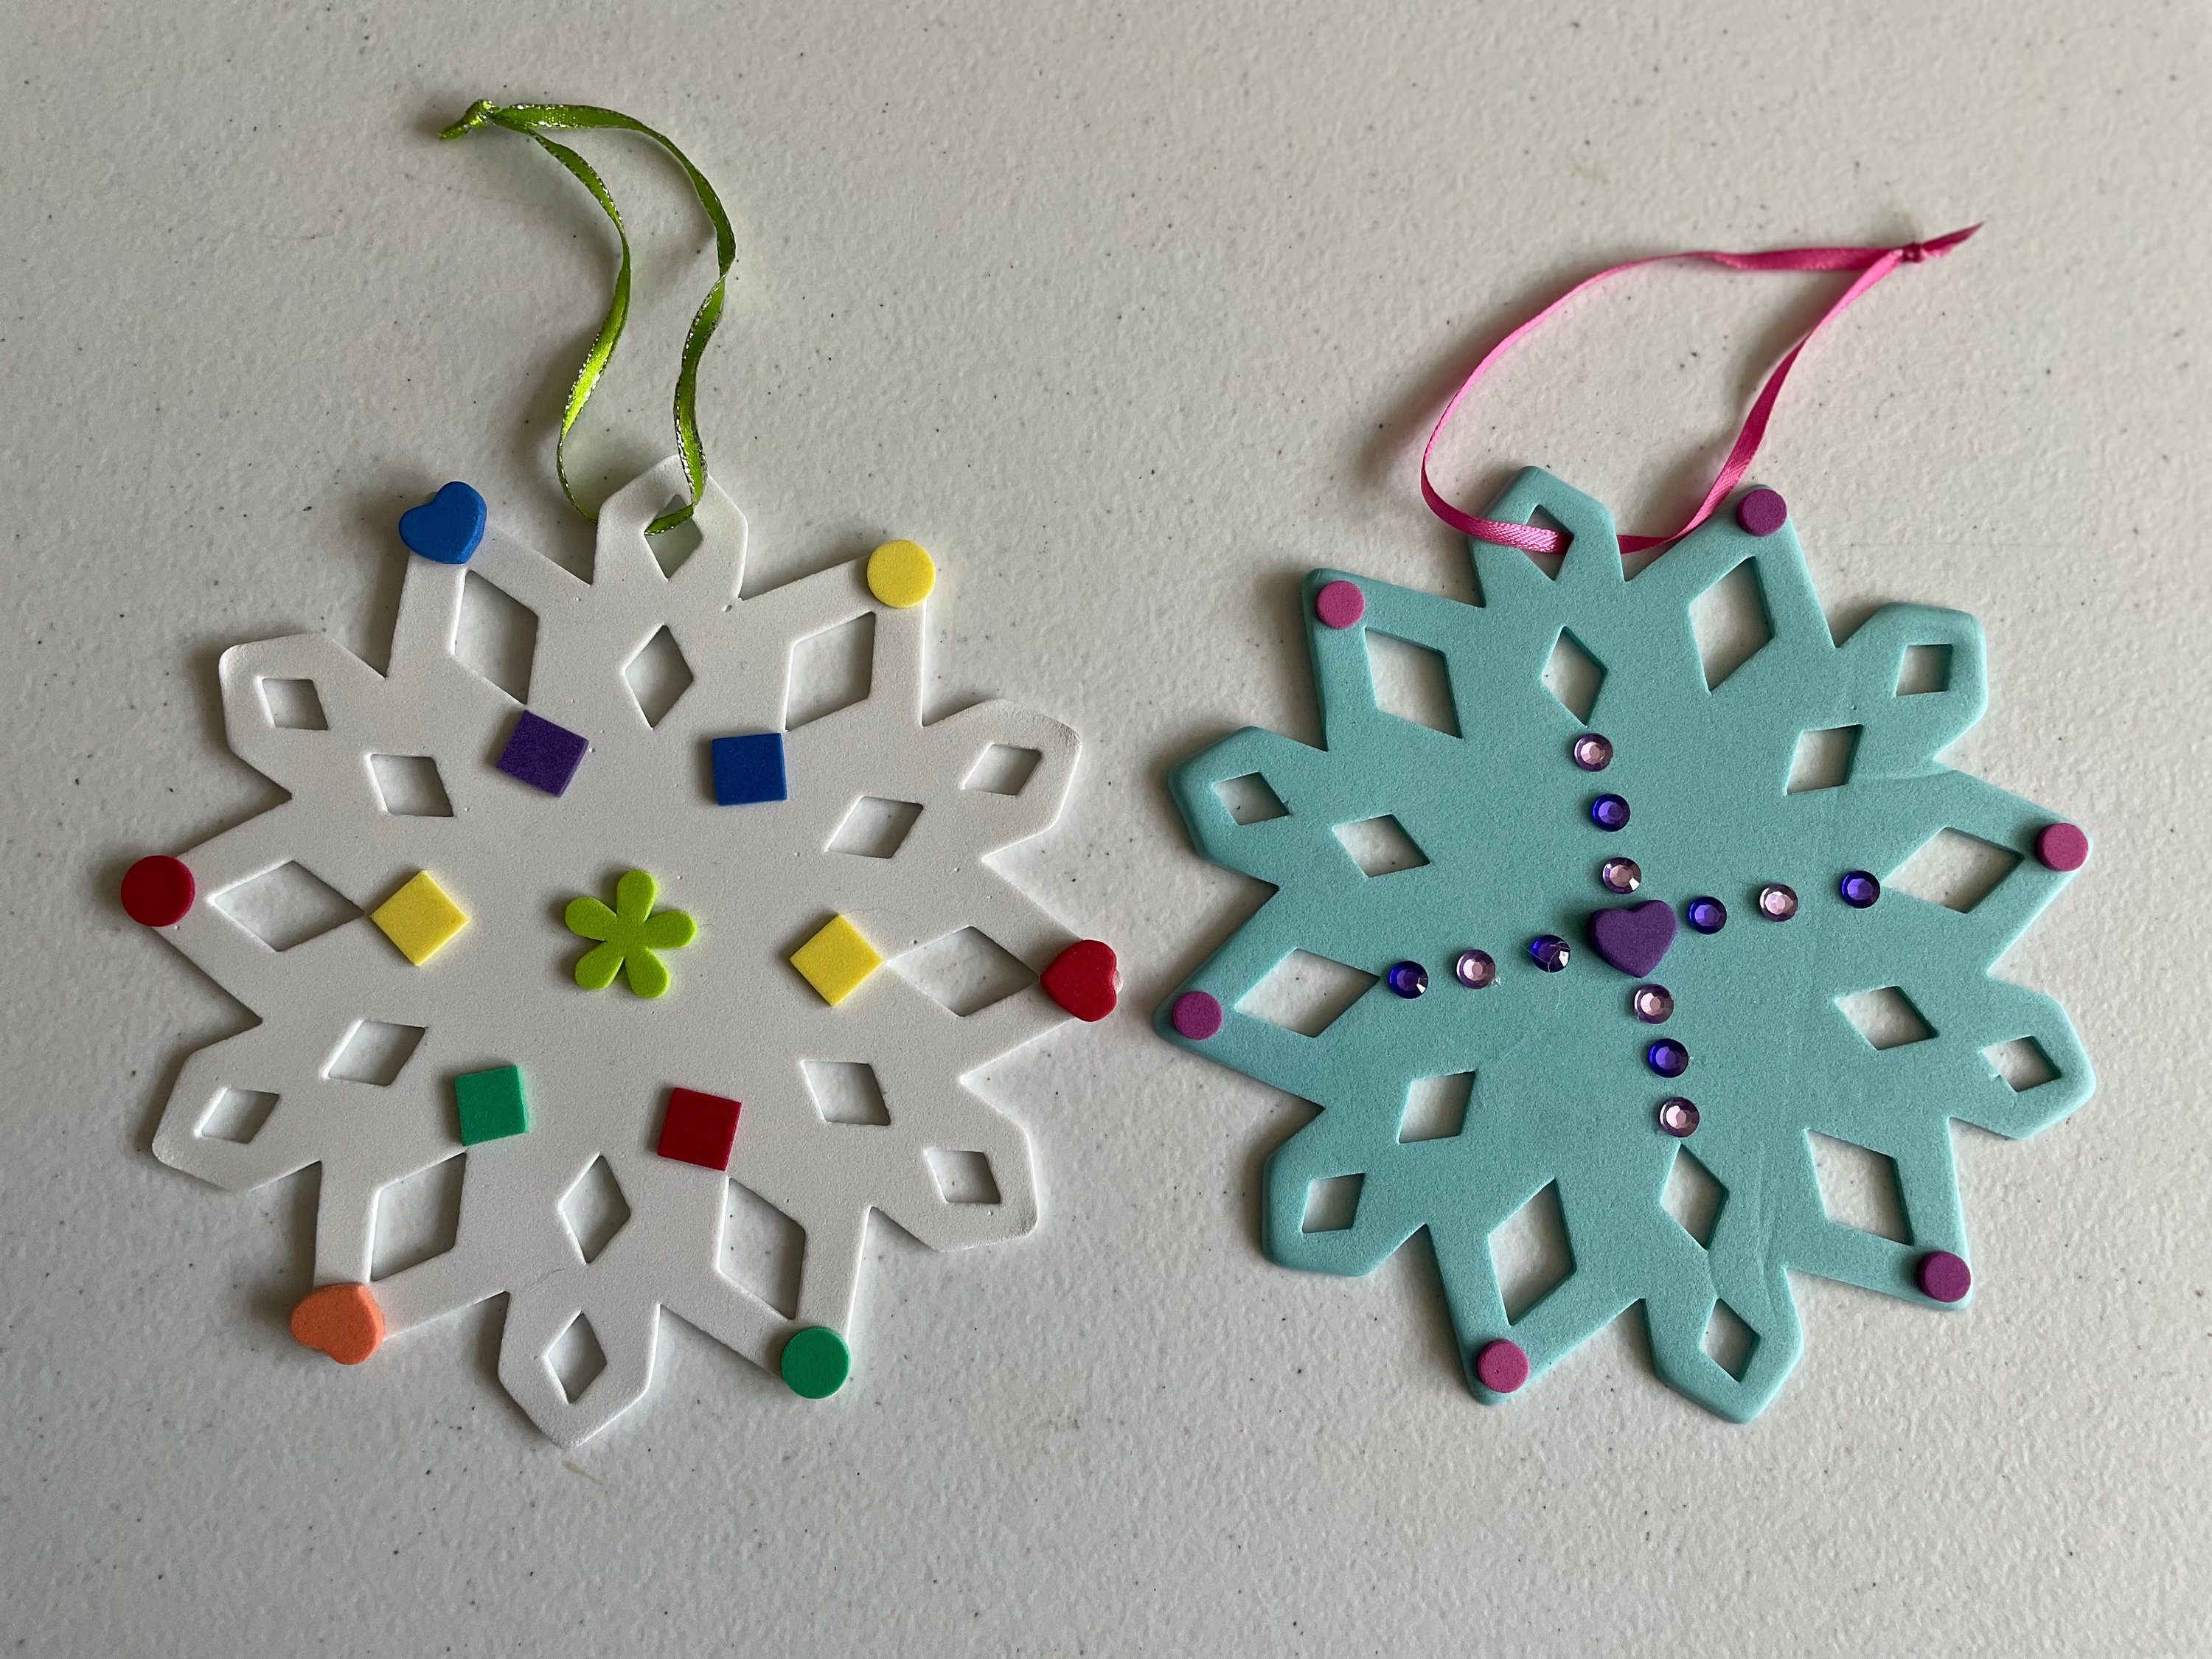 Whote Styrofoam Snowflake, Christmas Decorations, Winter Décor, Foam  Shapes, Kids Crafts, Craft Supplies, Polystyrene Shapes. DIY Projects 